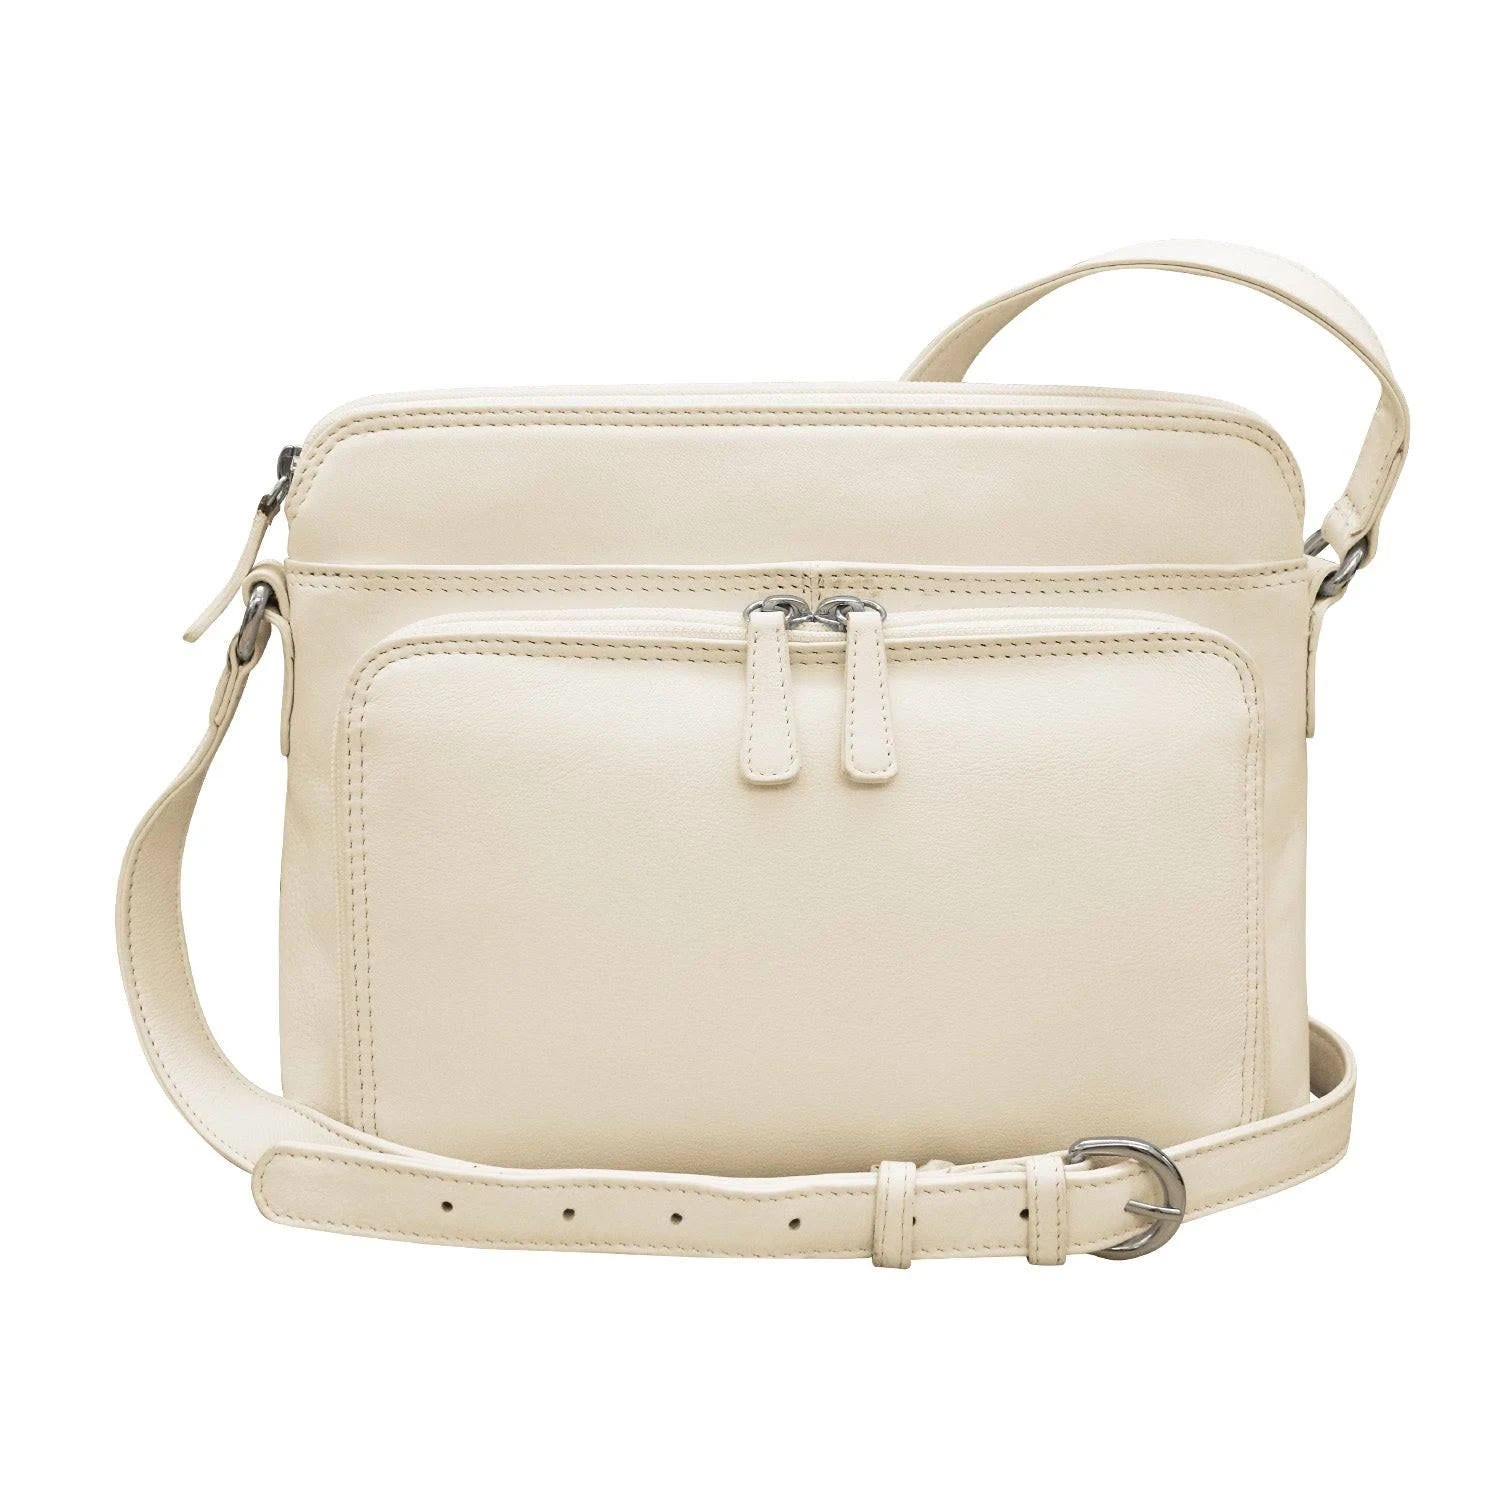 Genuine Soft Leather Cross Body Bag with Organizer Wallet and Adjustable Strap | Image